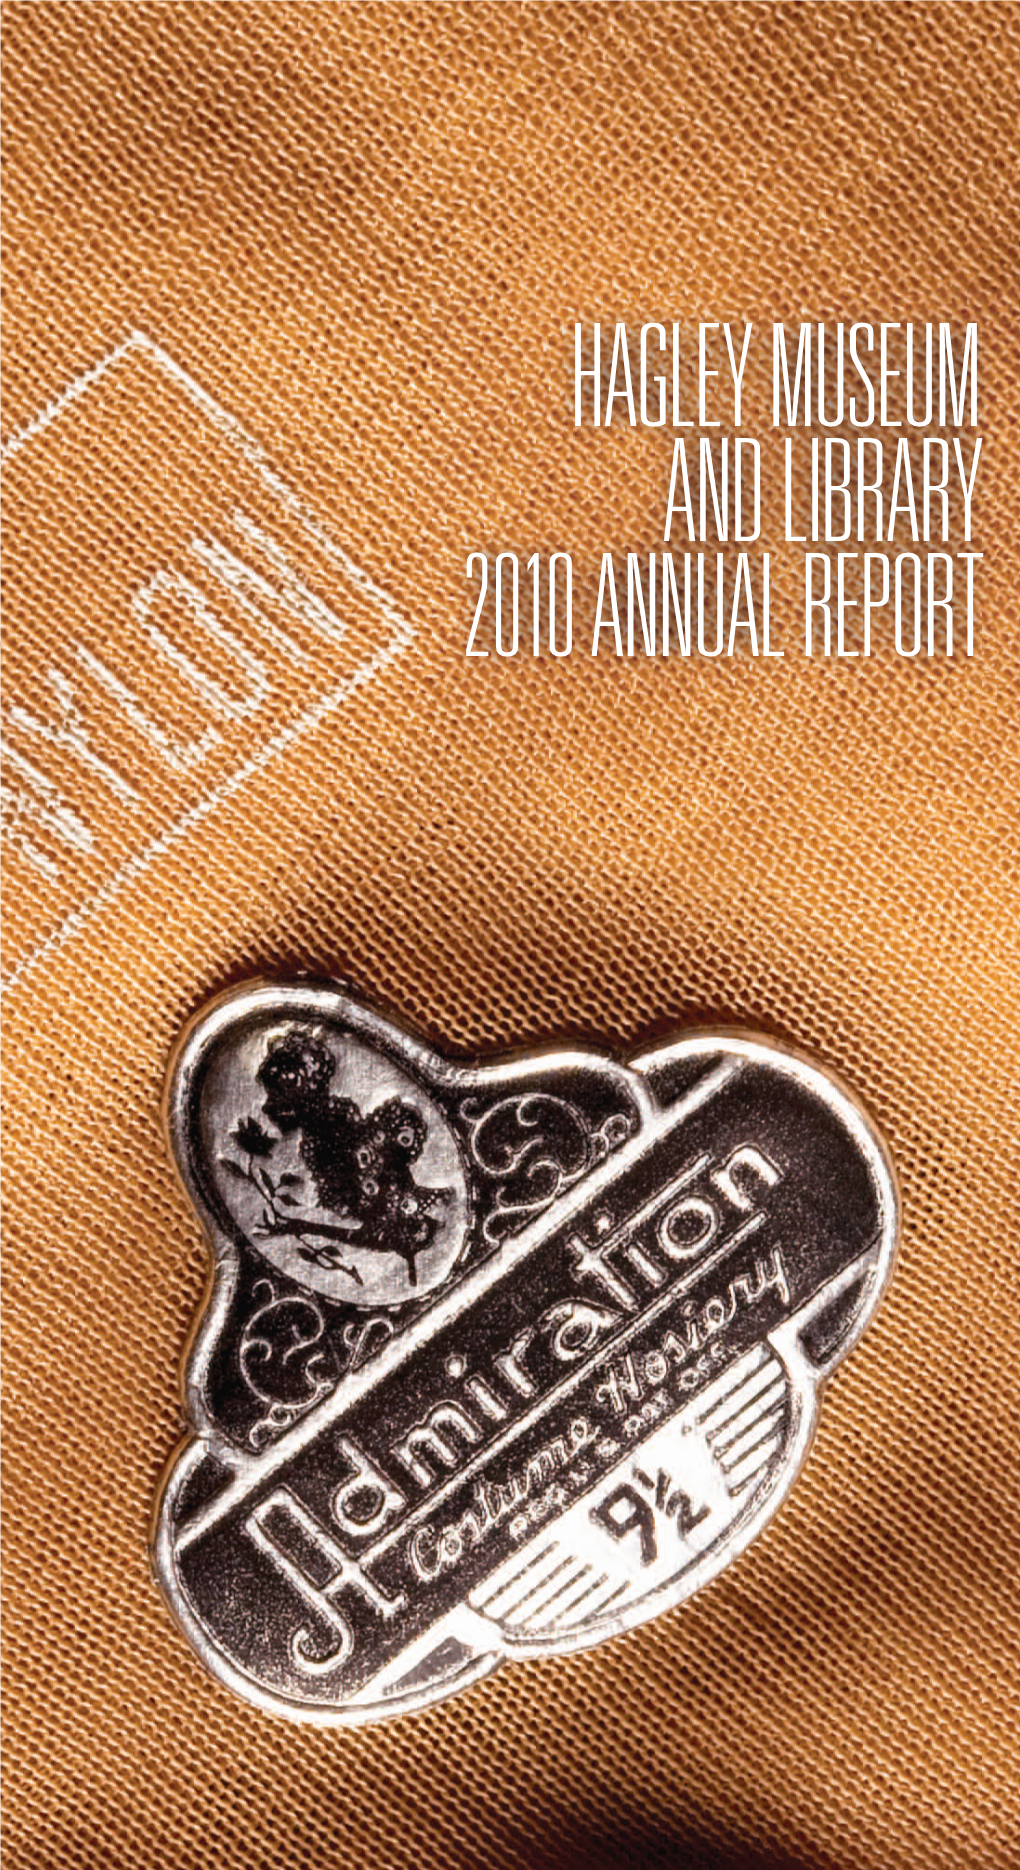 Hagley Museum and Library 2010 Annual Report